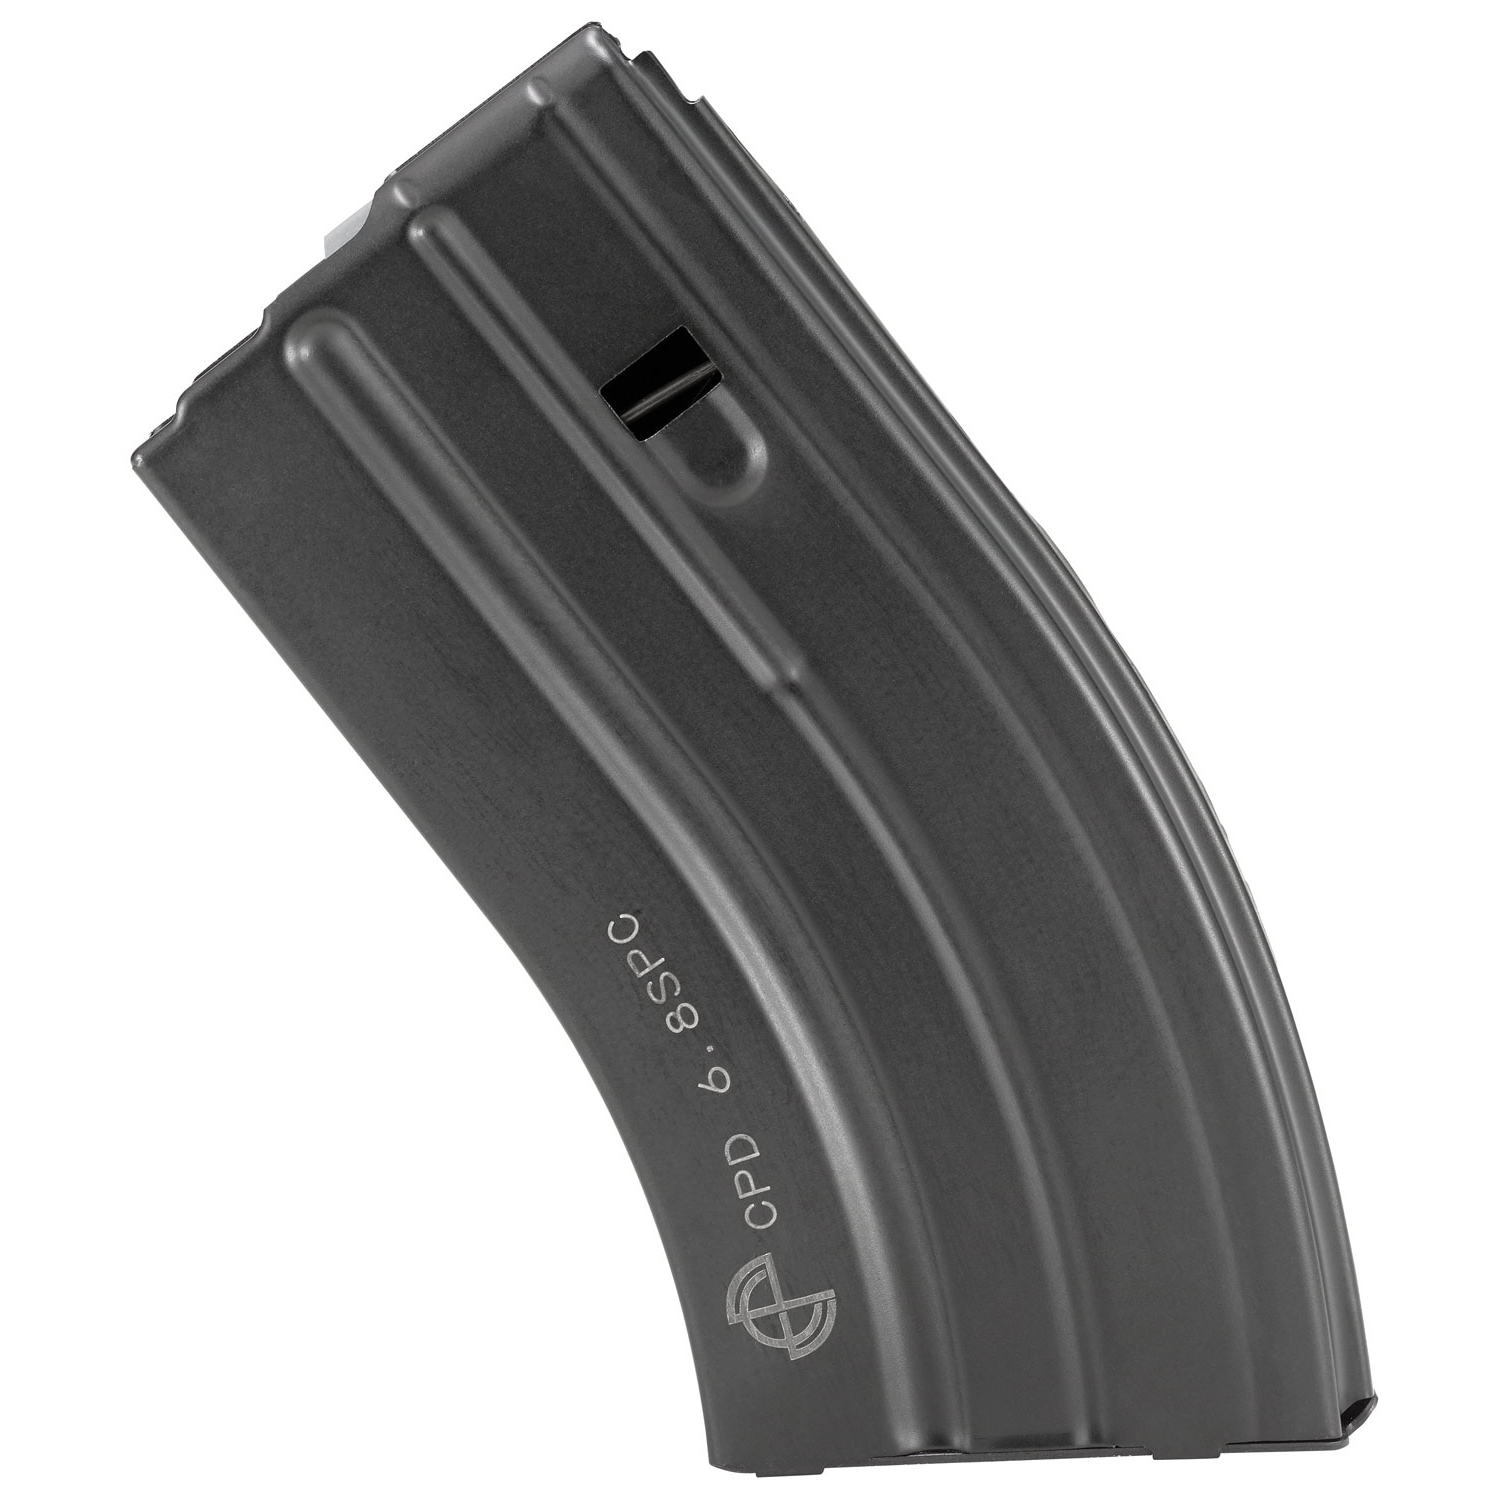 AMAG By CProductsDefense AR-15 SS Magazine 6.8 SPC 20 Rounds Stainless Steel Matte Black Finish Ammo